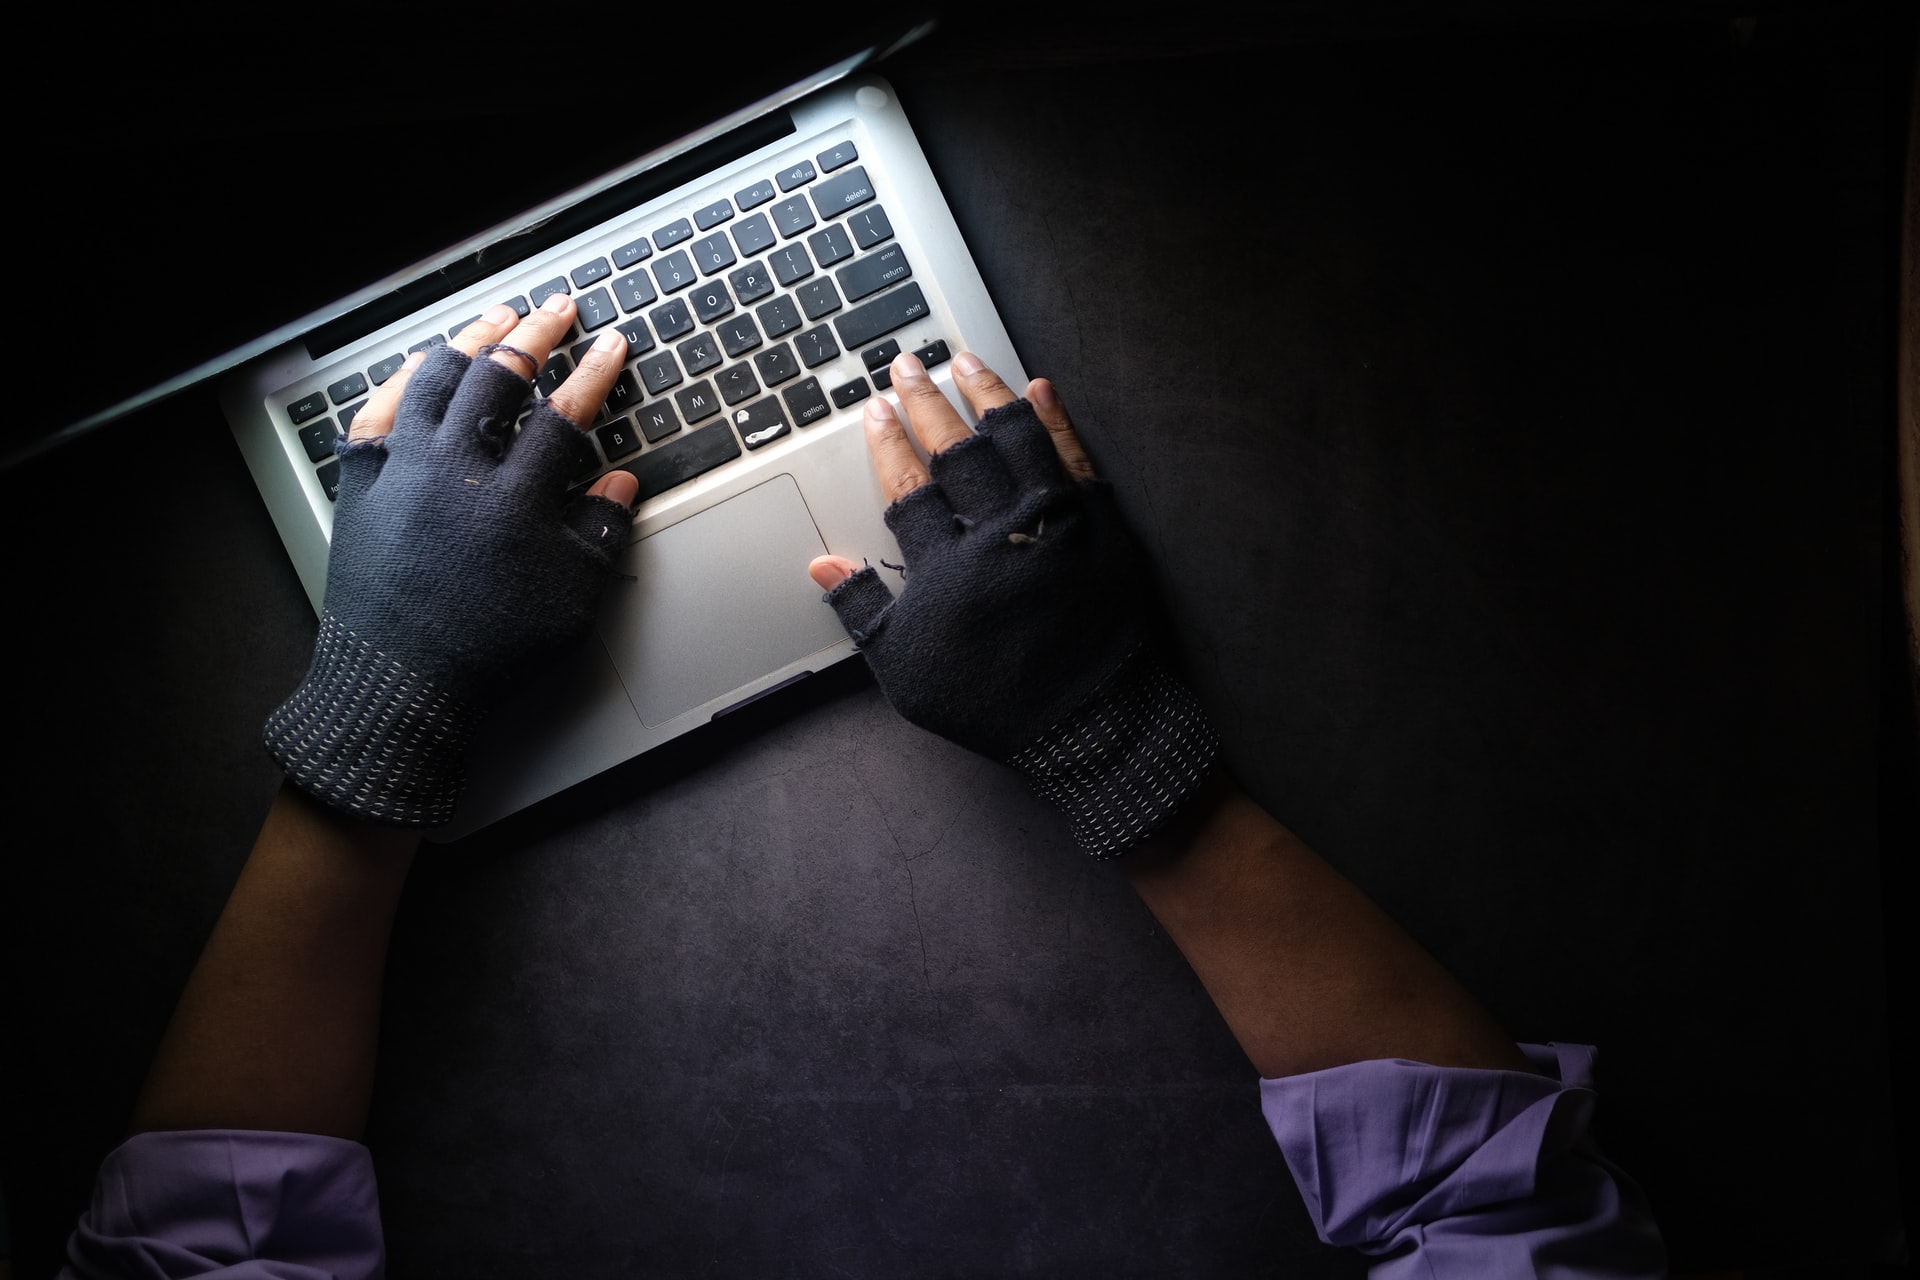 Person wearing black colored gloves typing on a laptop keyboard